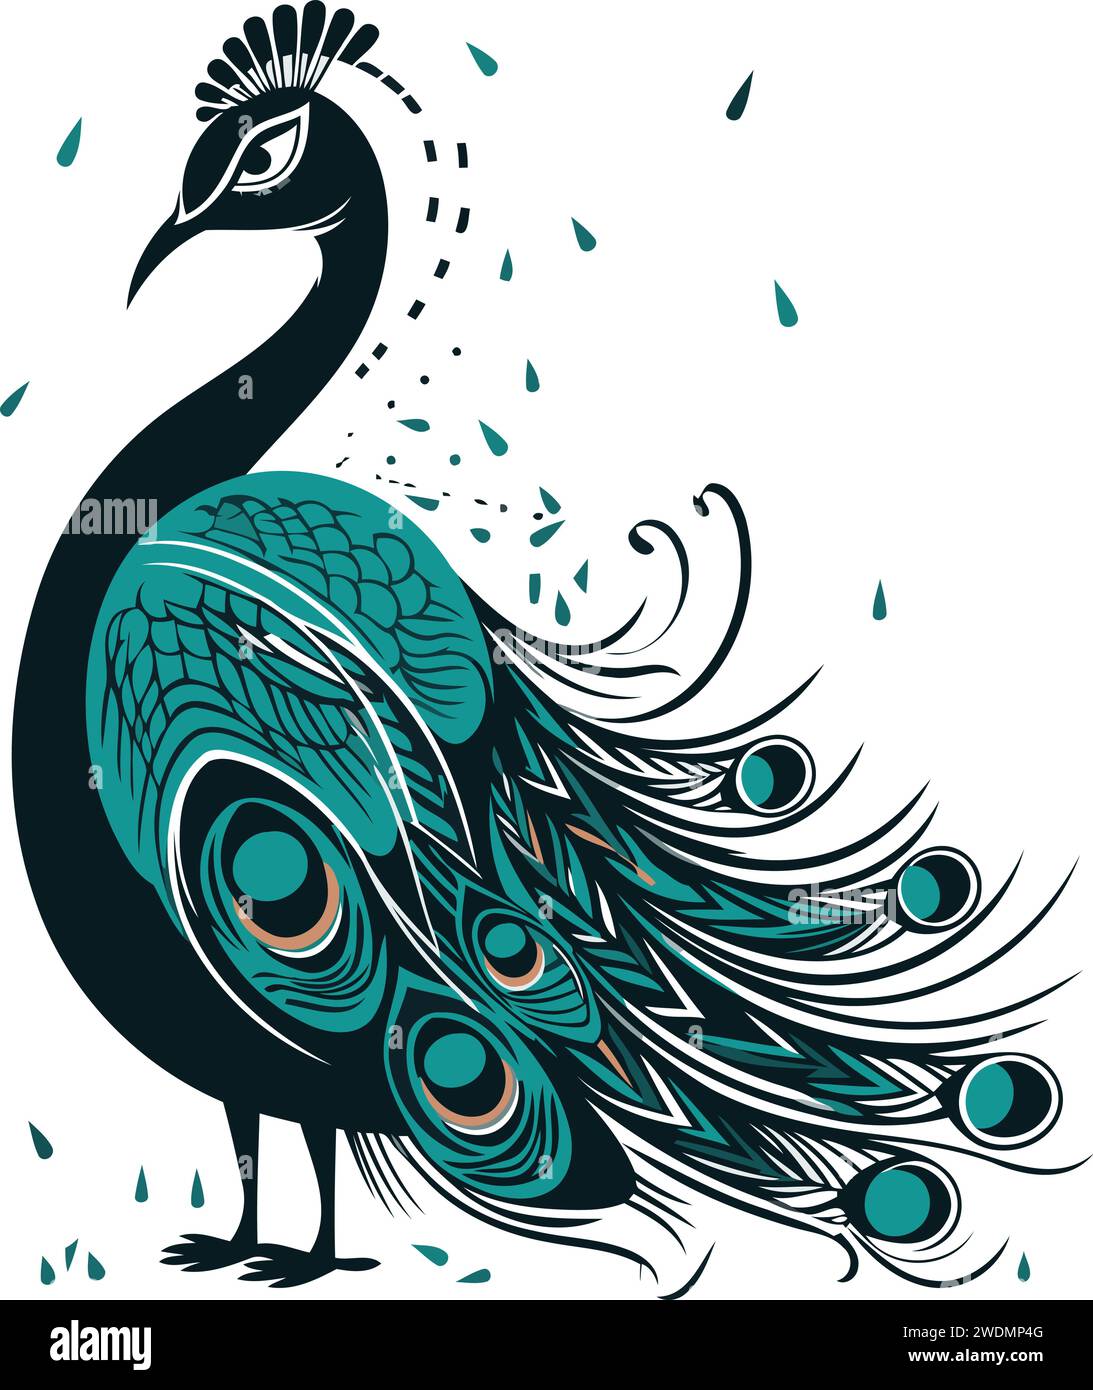 Peacock. Vector illustration. Isolated on white background Stock